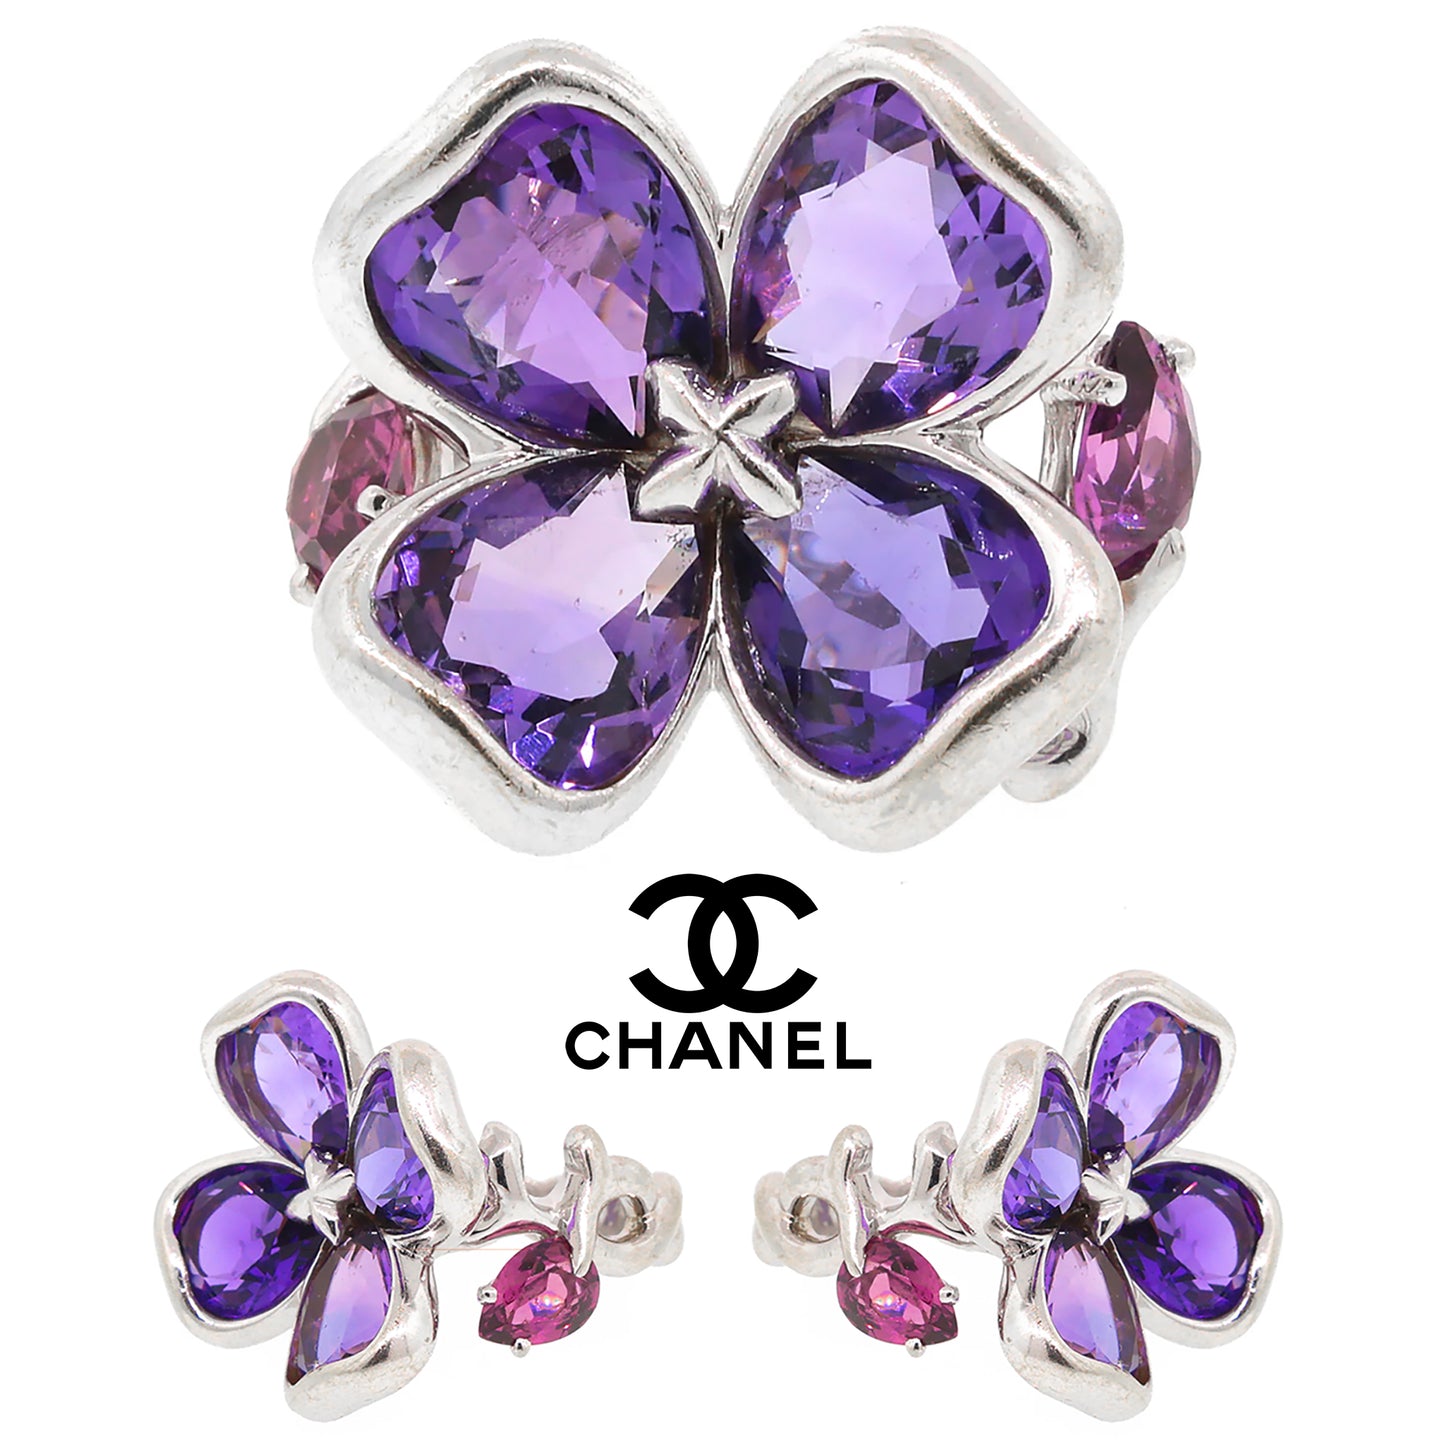 Chanel Camellia Flower Ring with Amethyst & Tourmaline